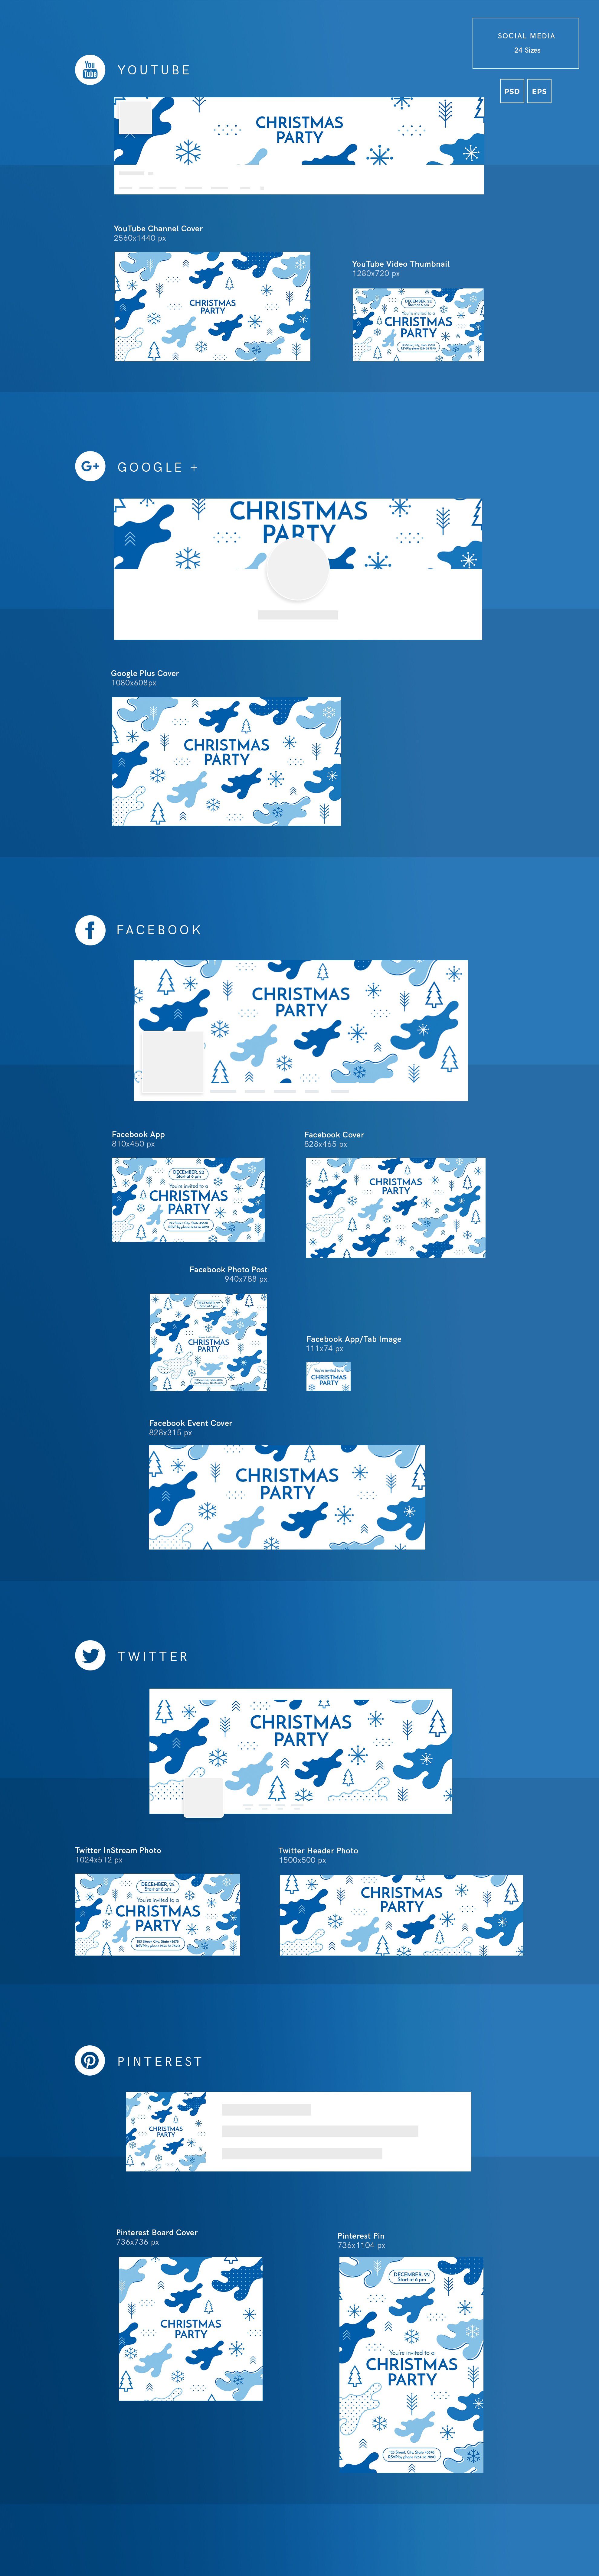 Social Media Pack | Christmas Party preview image.